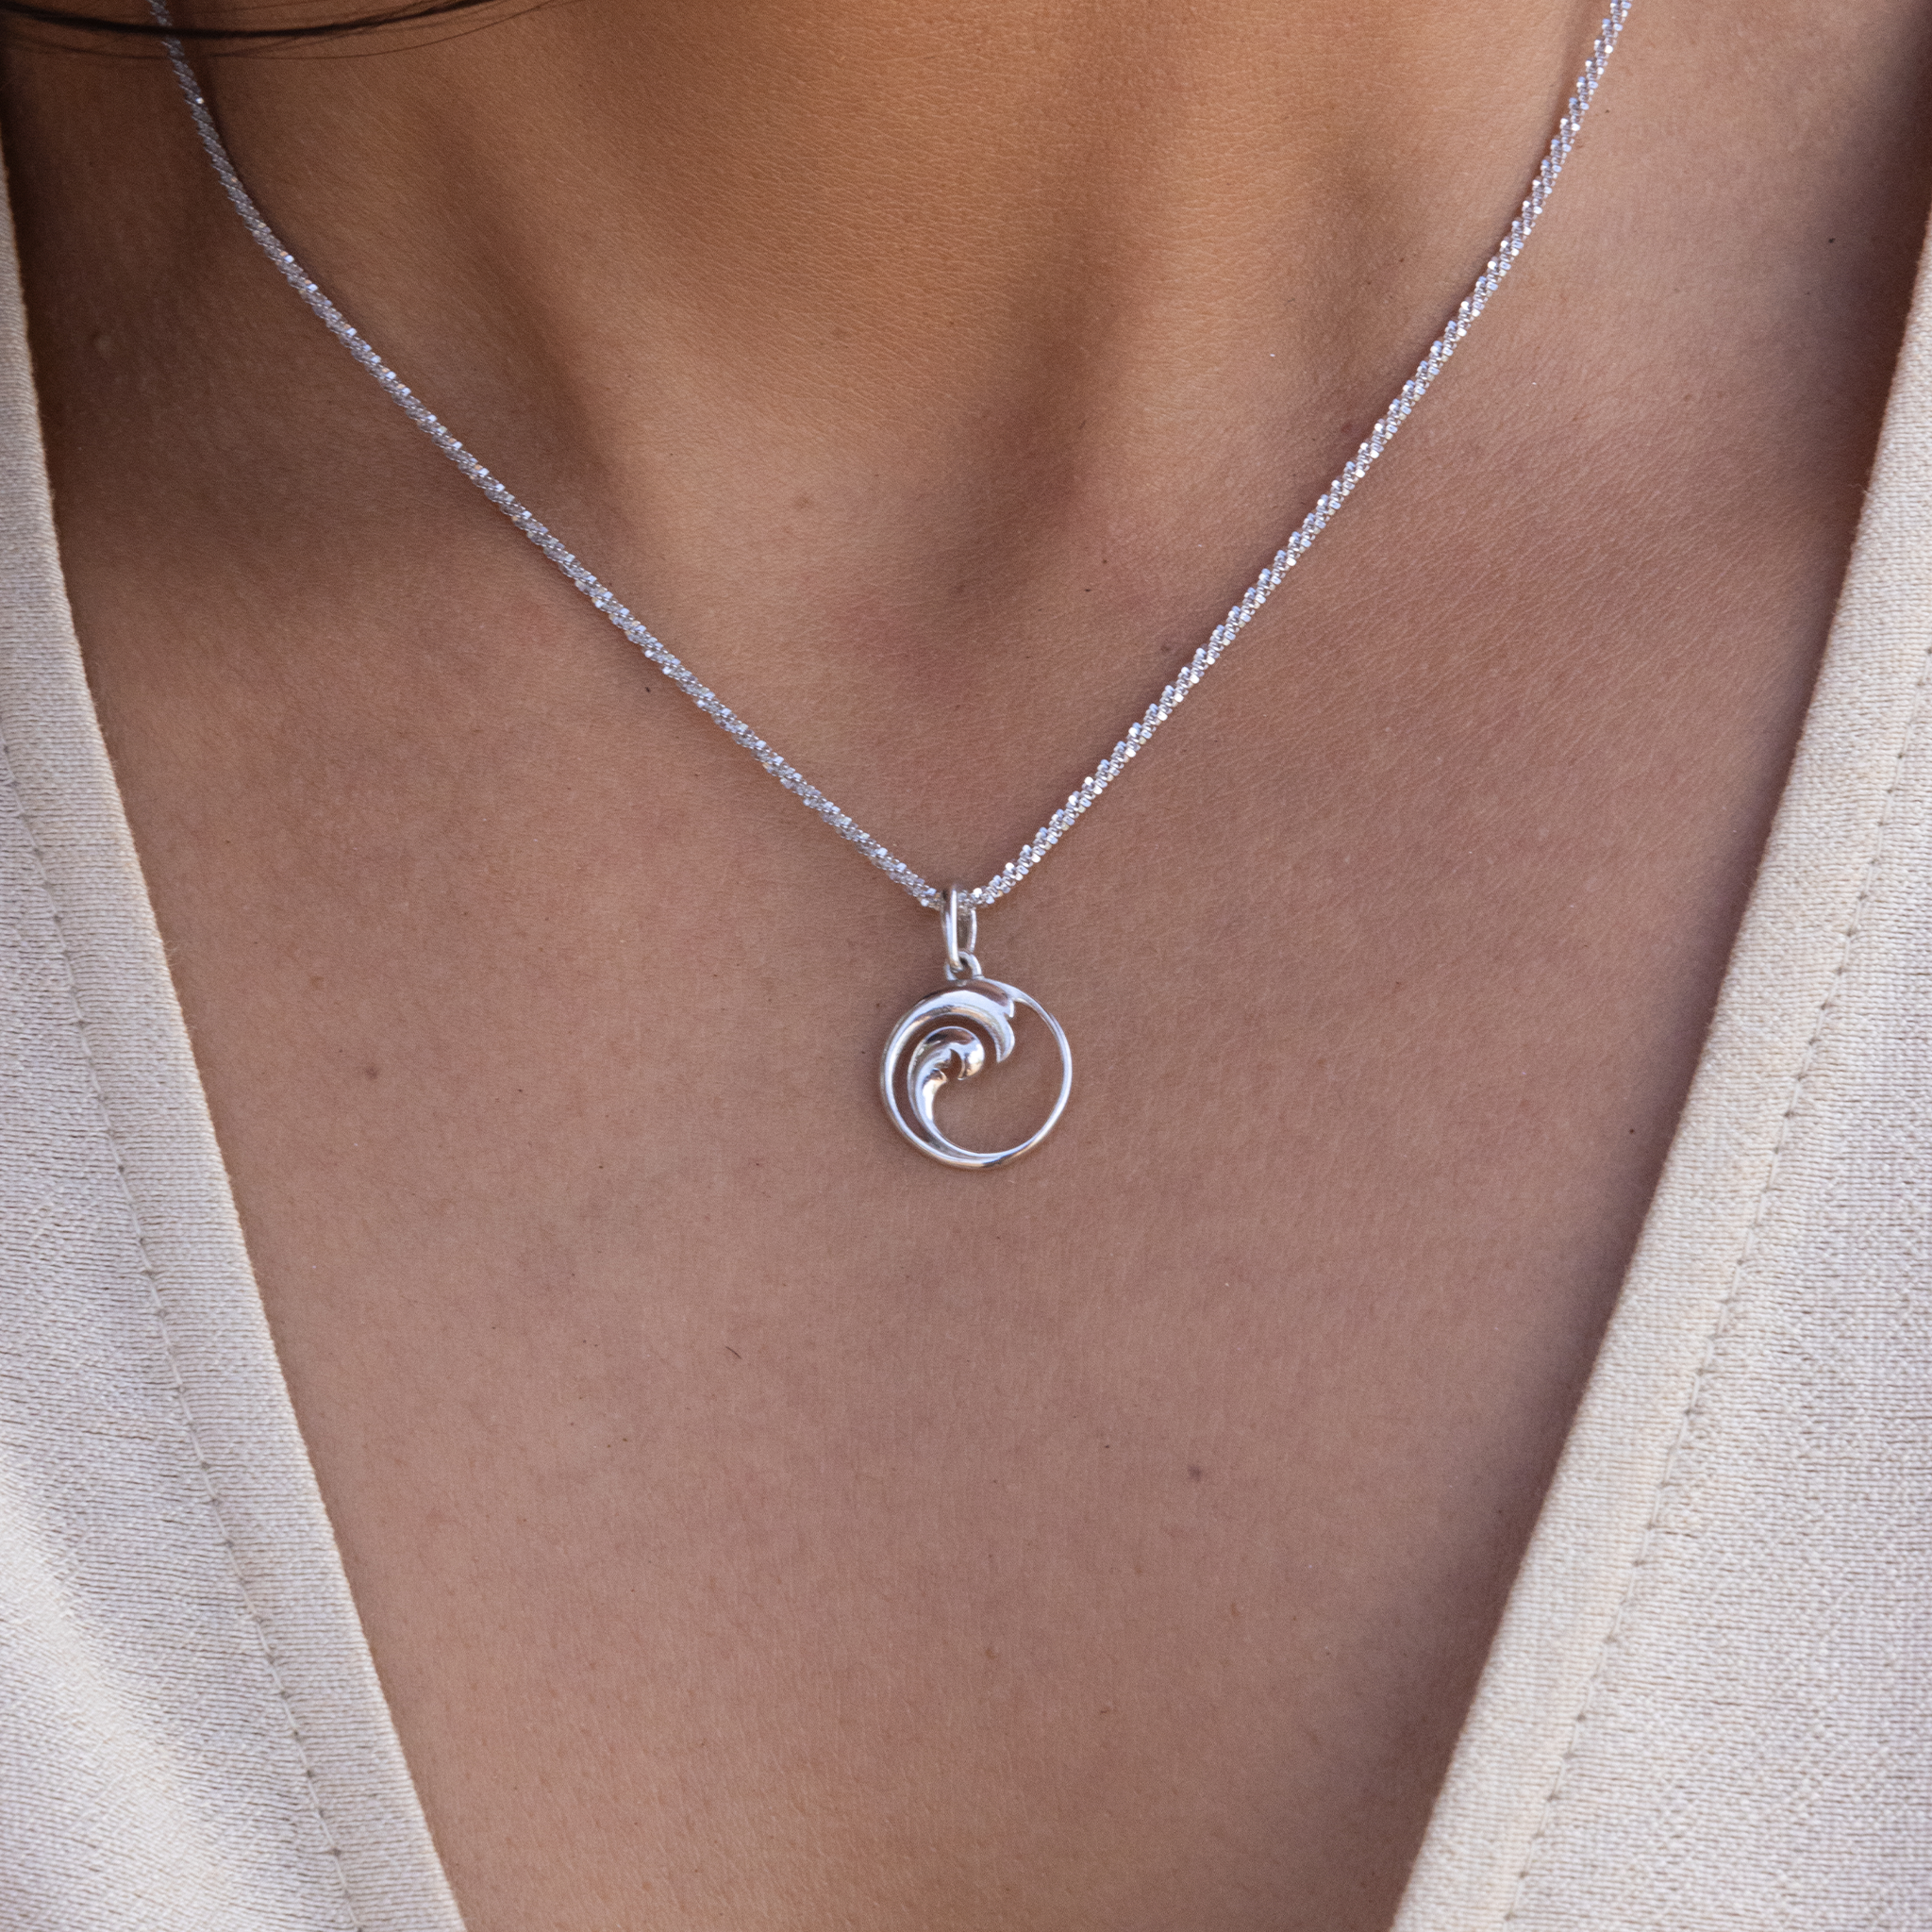 Nalu Pendant / Charm in Sterling Silver - 12mm